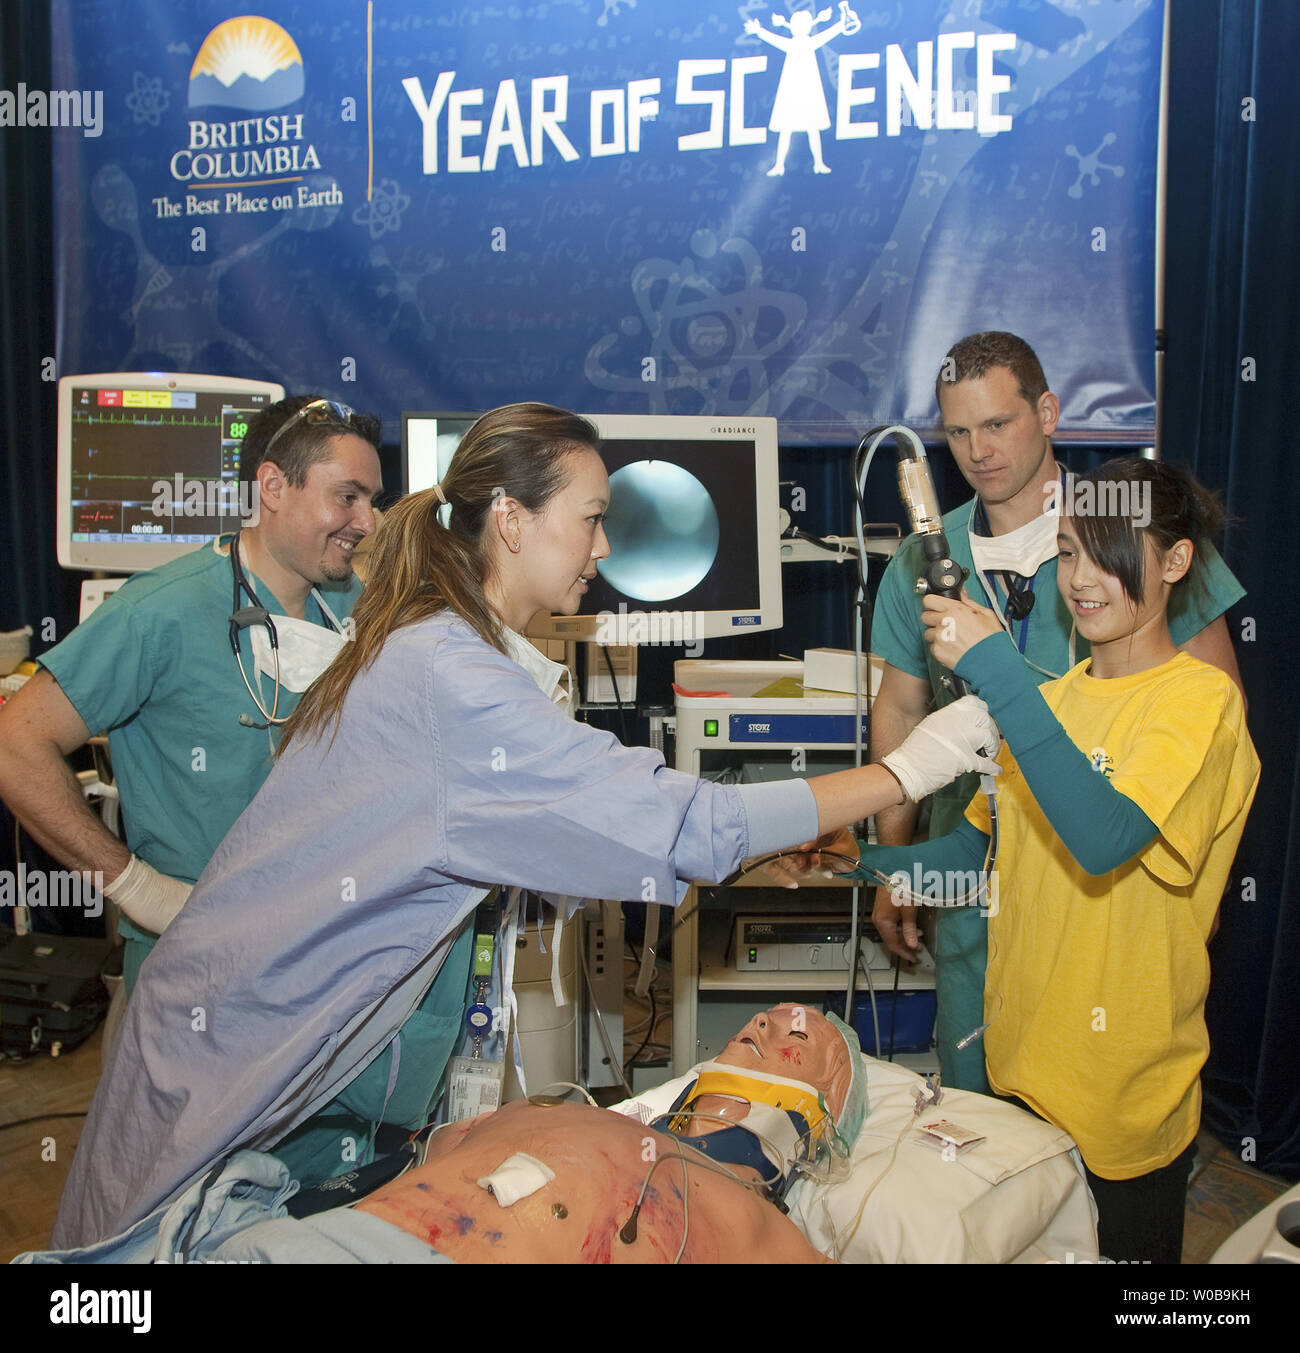 High school students interact with doctors and technicians demonstrating new technology including iPad and iPhone applications being used in an Emergency Room trauma simulation during the official opening of the two day Year of Science, Science and Health Expo at the Fairmont Waterfront Hotel in downtown Vancouver, BC, on November 25, 2010. The Expo hopes to inspire high school students to choose careers in health sciences and bio technology.   UPI/Heinz Ruckemann Stock Photo